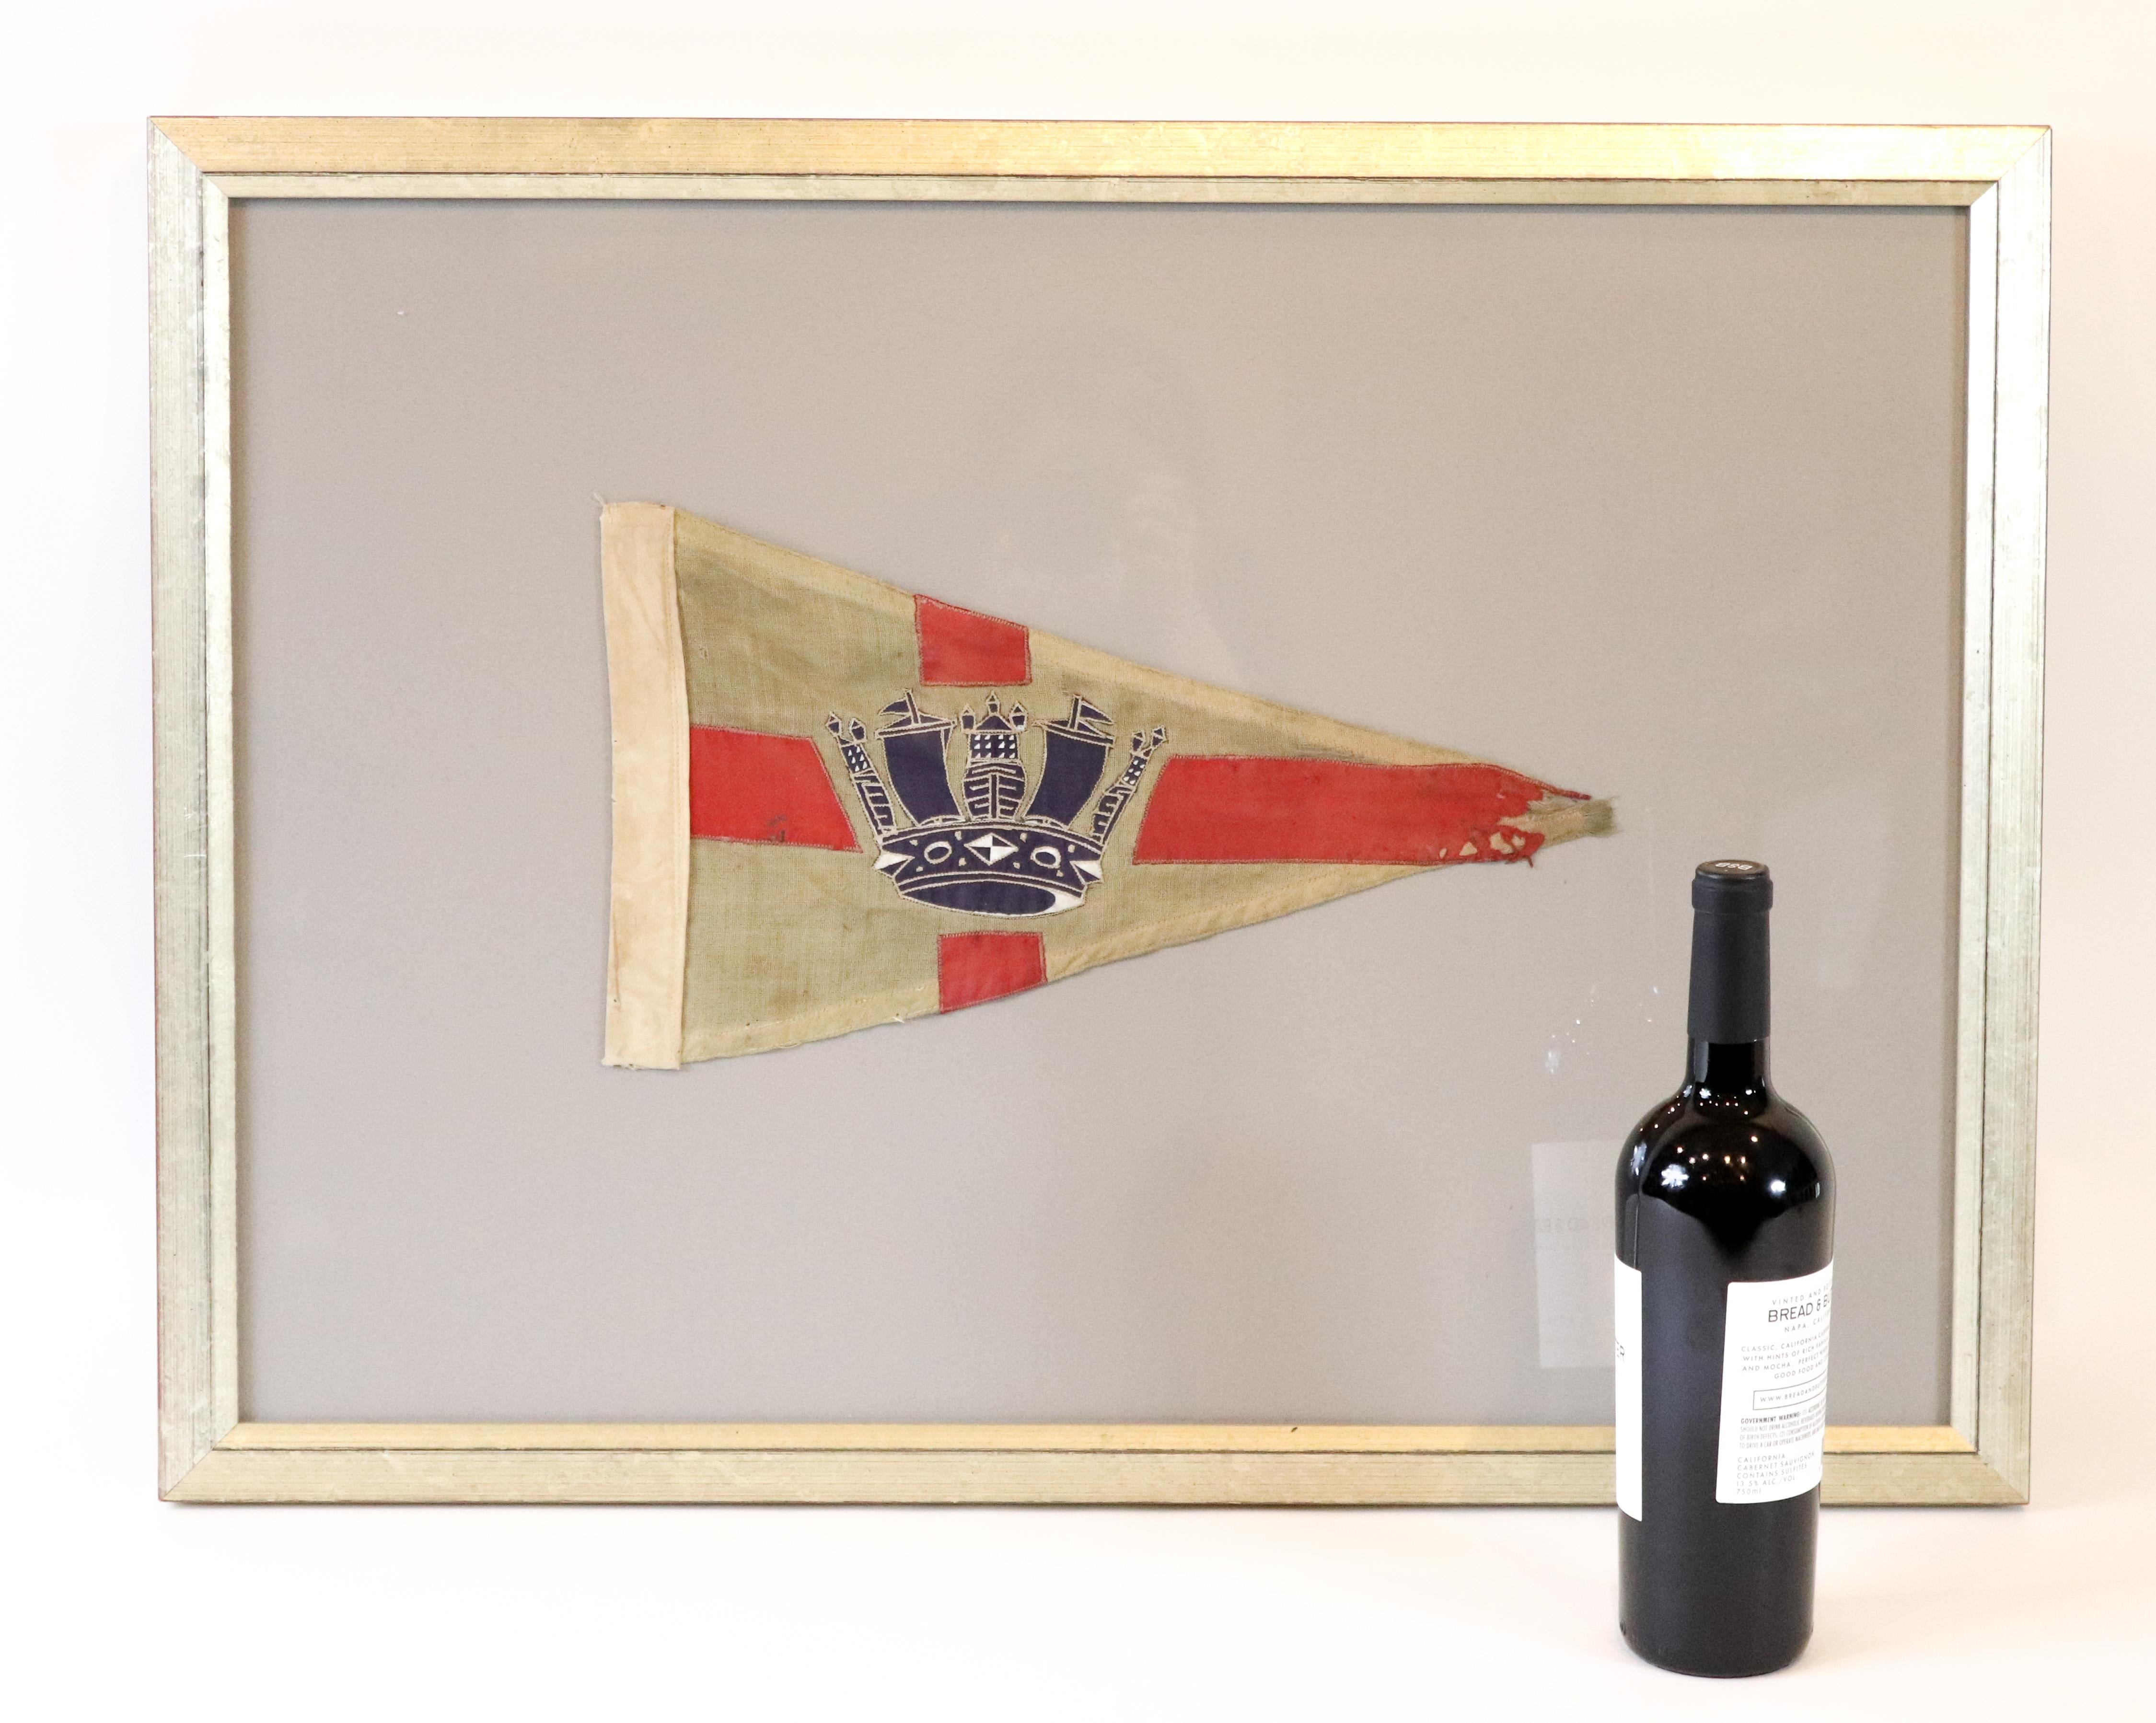 Vintage yacht burgee with Royal crown possibly from an English yacht squadron. Weathered condition. Mated and framed. Measures: 23